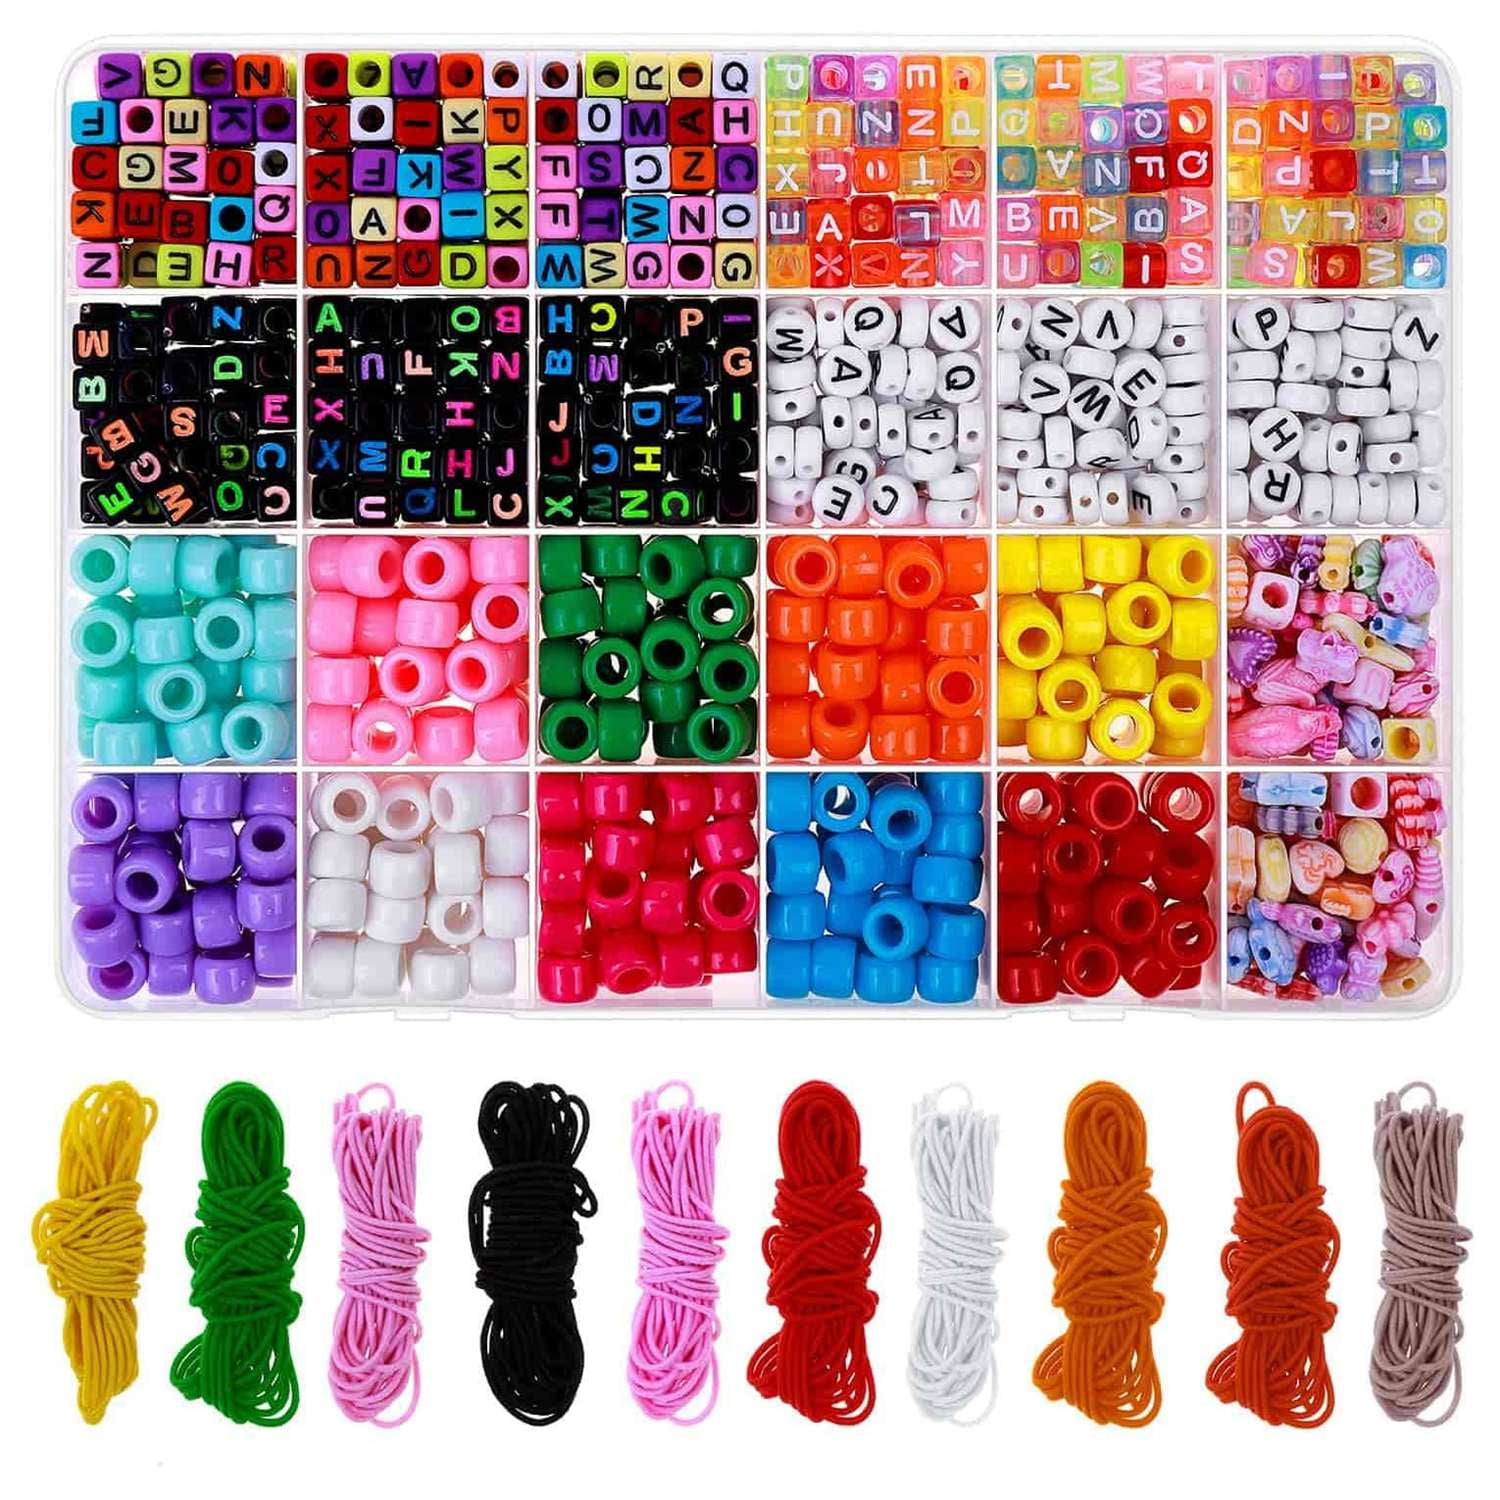 ADIIL 7200pcs Clay Beads Bracelet Making Kit, 20 Neutral Colors 6mm Polymer  Heishi Beads for Jewelry Making, Friendship Bracelet Kit with Letter Beads  Christmas… | Bead crafts diy, Bead kits, Clay beads